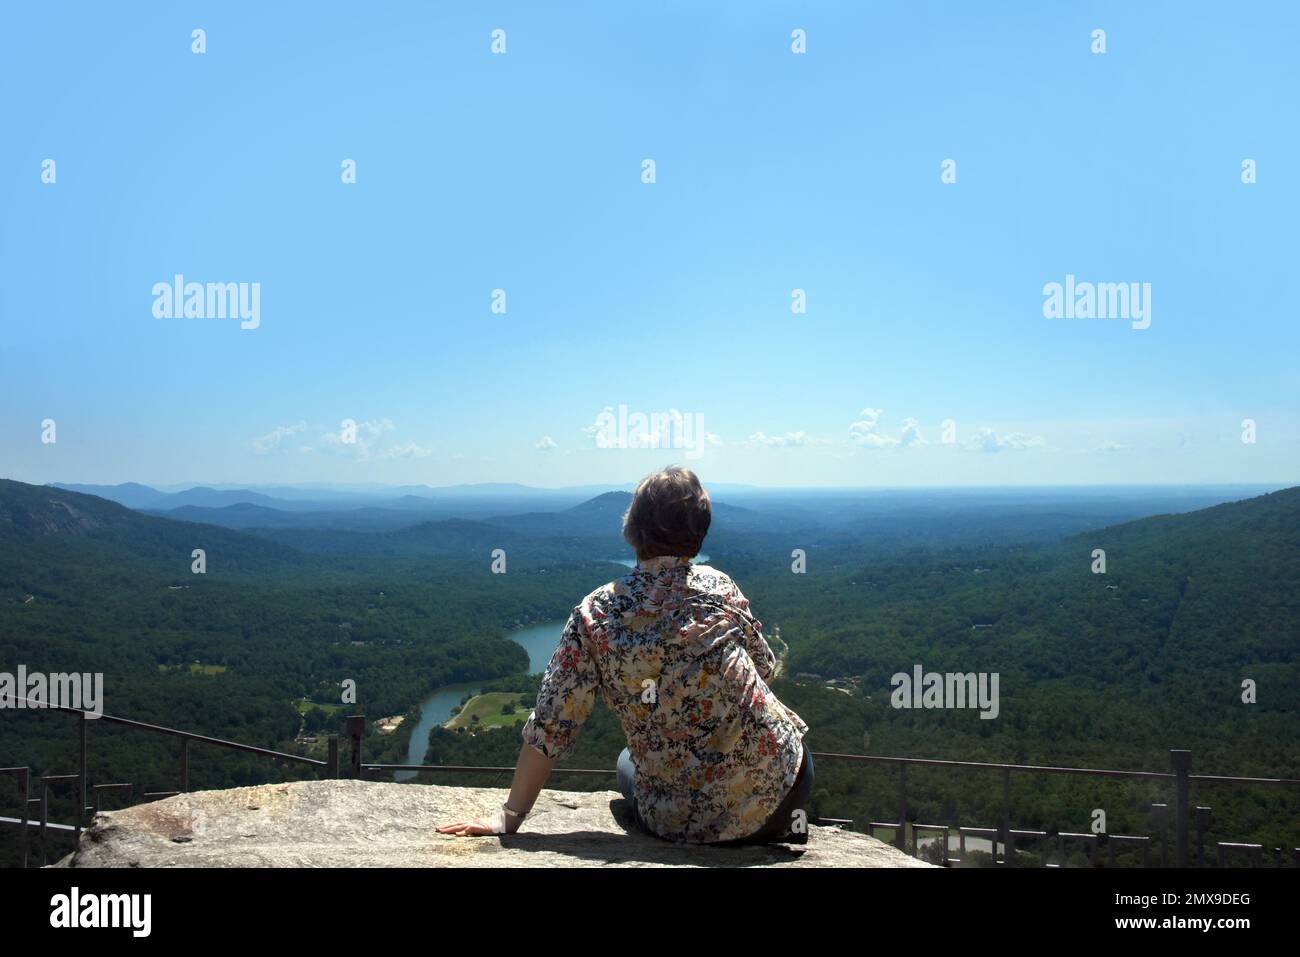 Visitor sits absorbing the view at the top of Chimney Rock, Chimney Rock State Park, North Carolina.  Visitor is a senior citizen and is wearing jeans Stock Photo